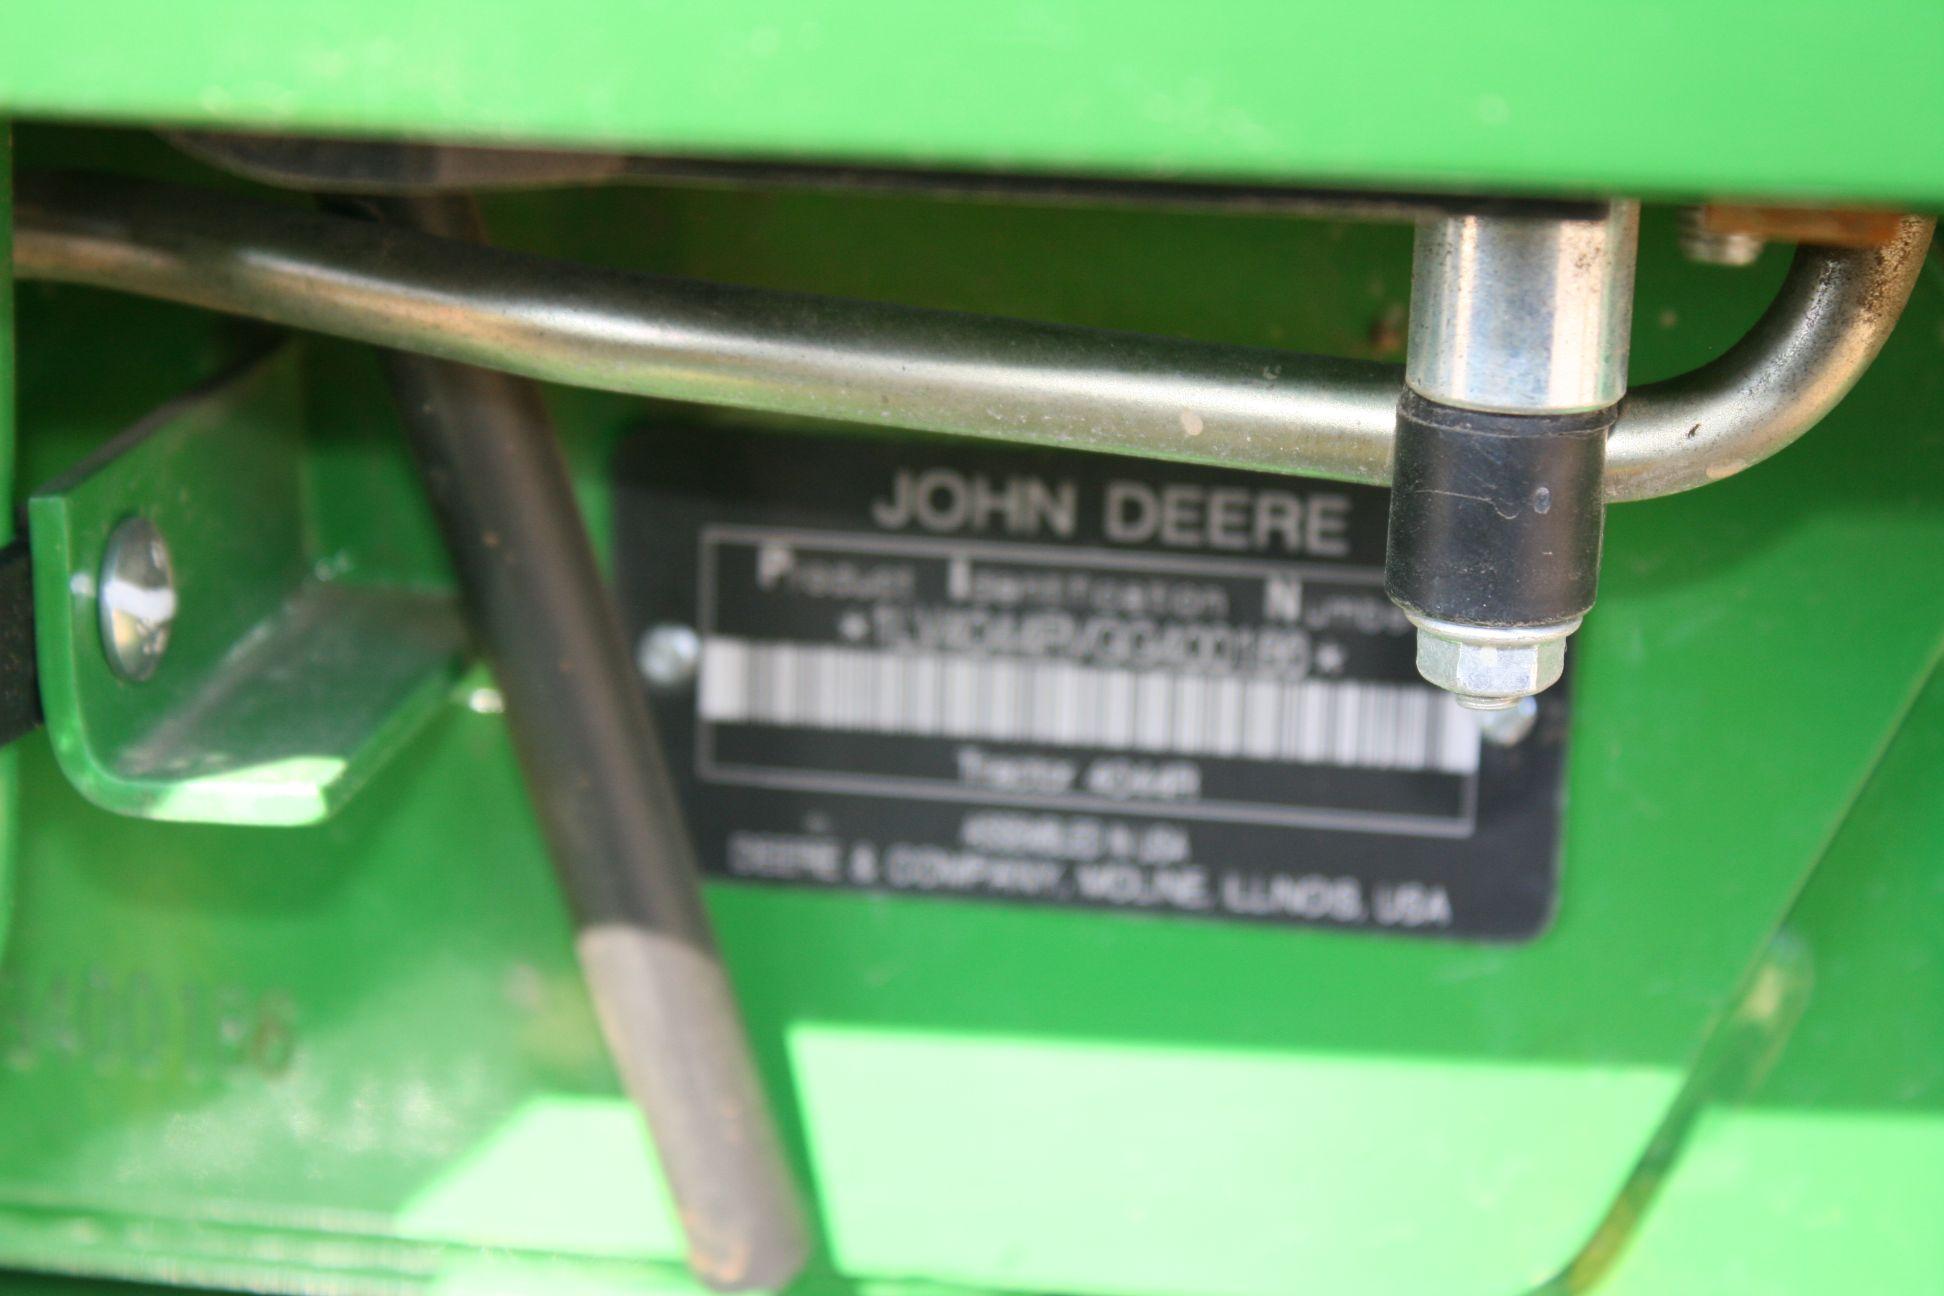 JD 4044R Tractor with H180 loader, Cab, A/C Heat, Diesel, 90.9 HRS.